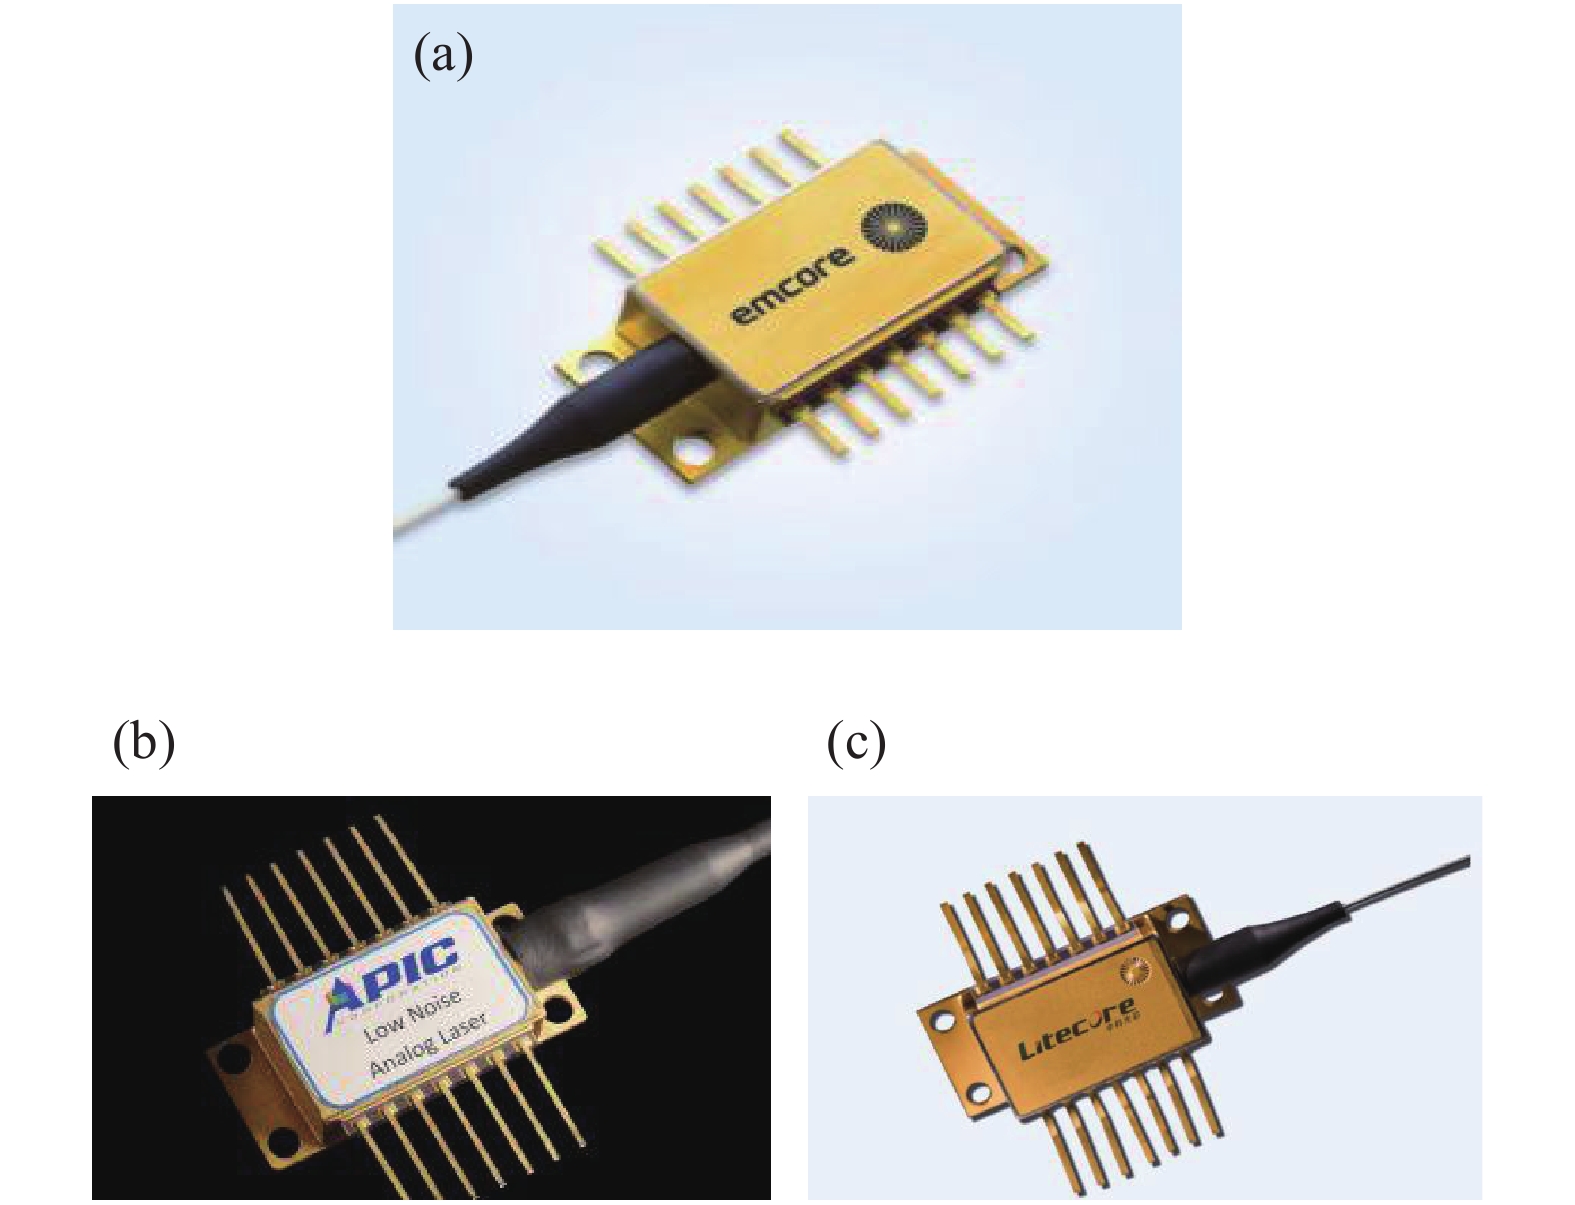 Semiconductor laser with high power and low noise. (a)-(c) are the semiconductor laser made by Emcore[18] in the U.S.A., Apic[19] in the U.S.A. and Z.K. Litecore[20] in China, respectively